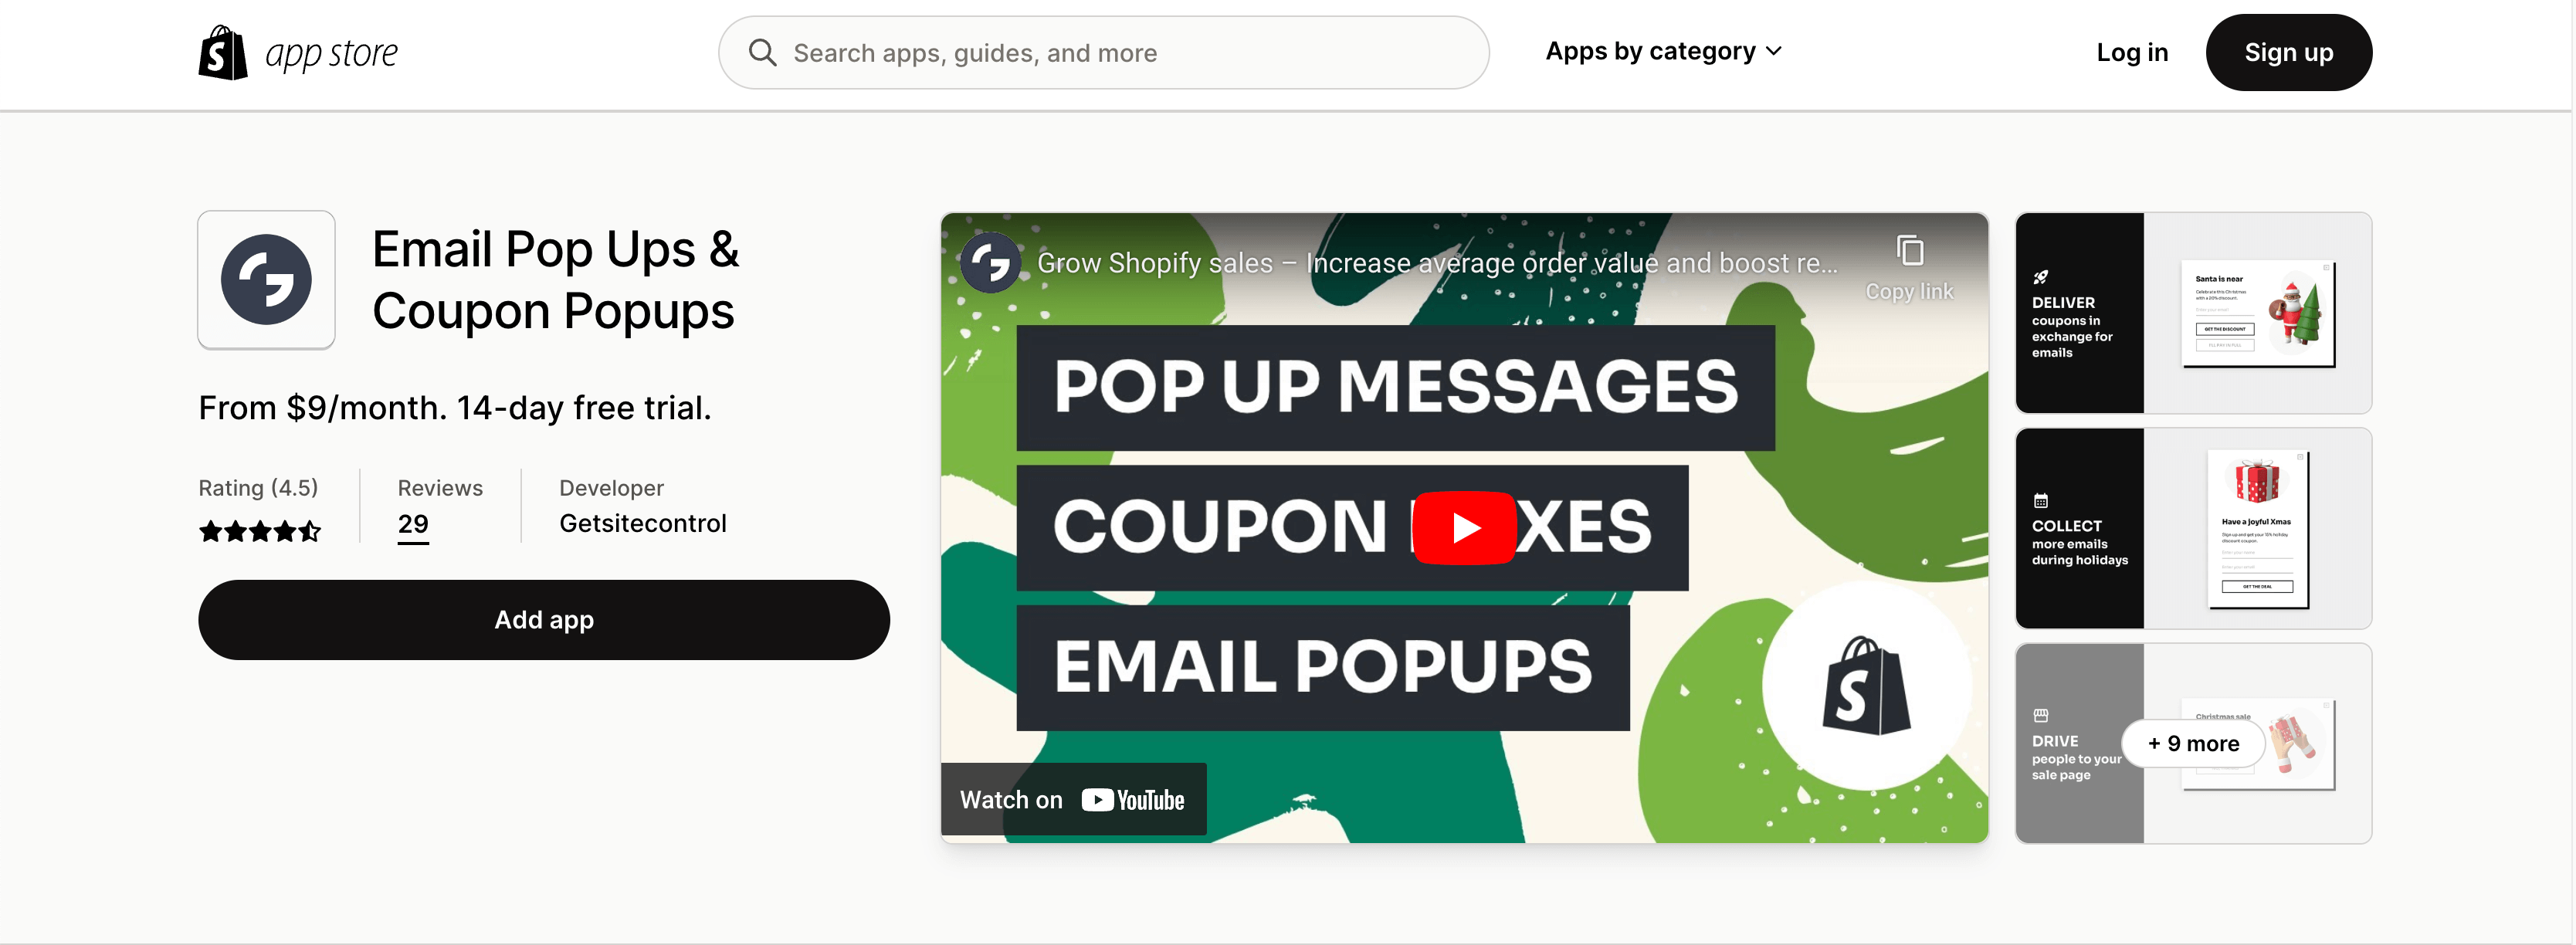 Email Pop Ups & Coupon Popups Shopify